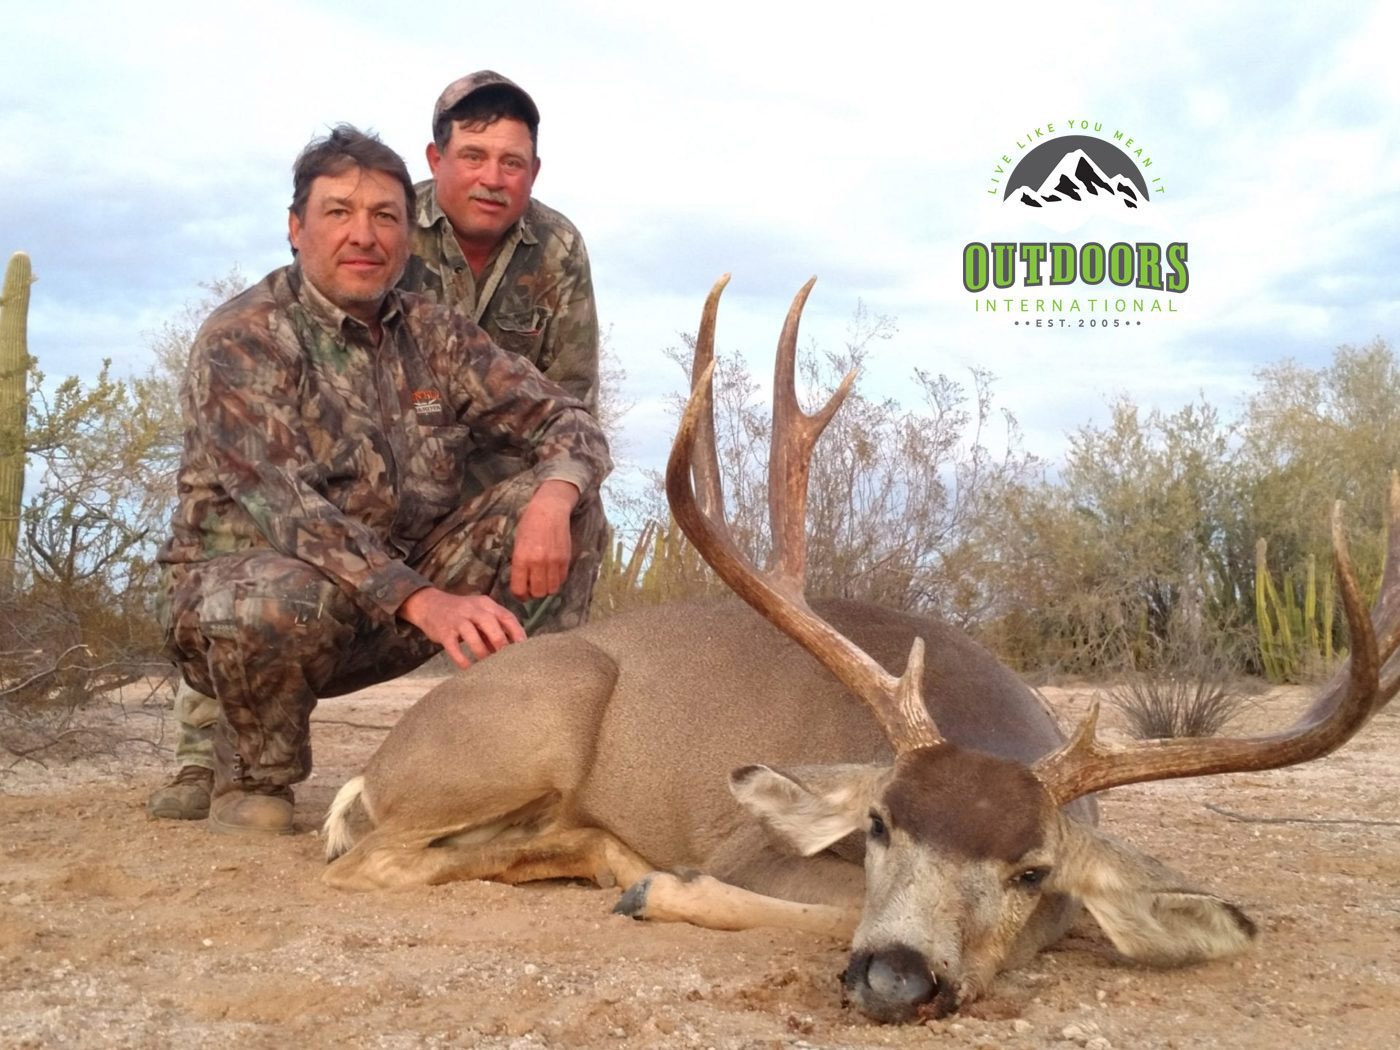 I couldn’t have asked for more. Very friendly, knowledgeable, helpful, caring, Best hunt I ever had.